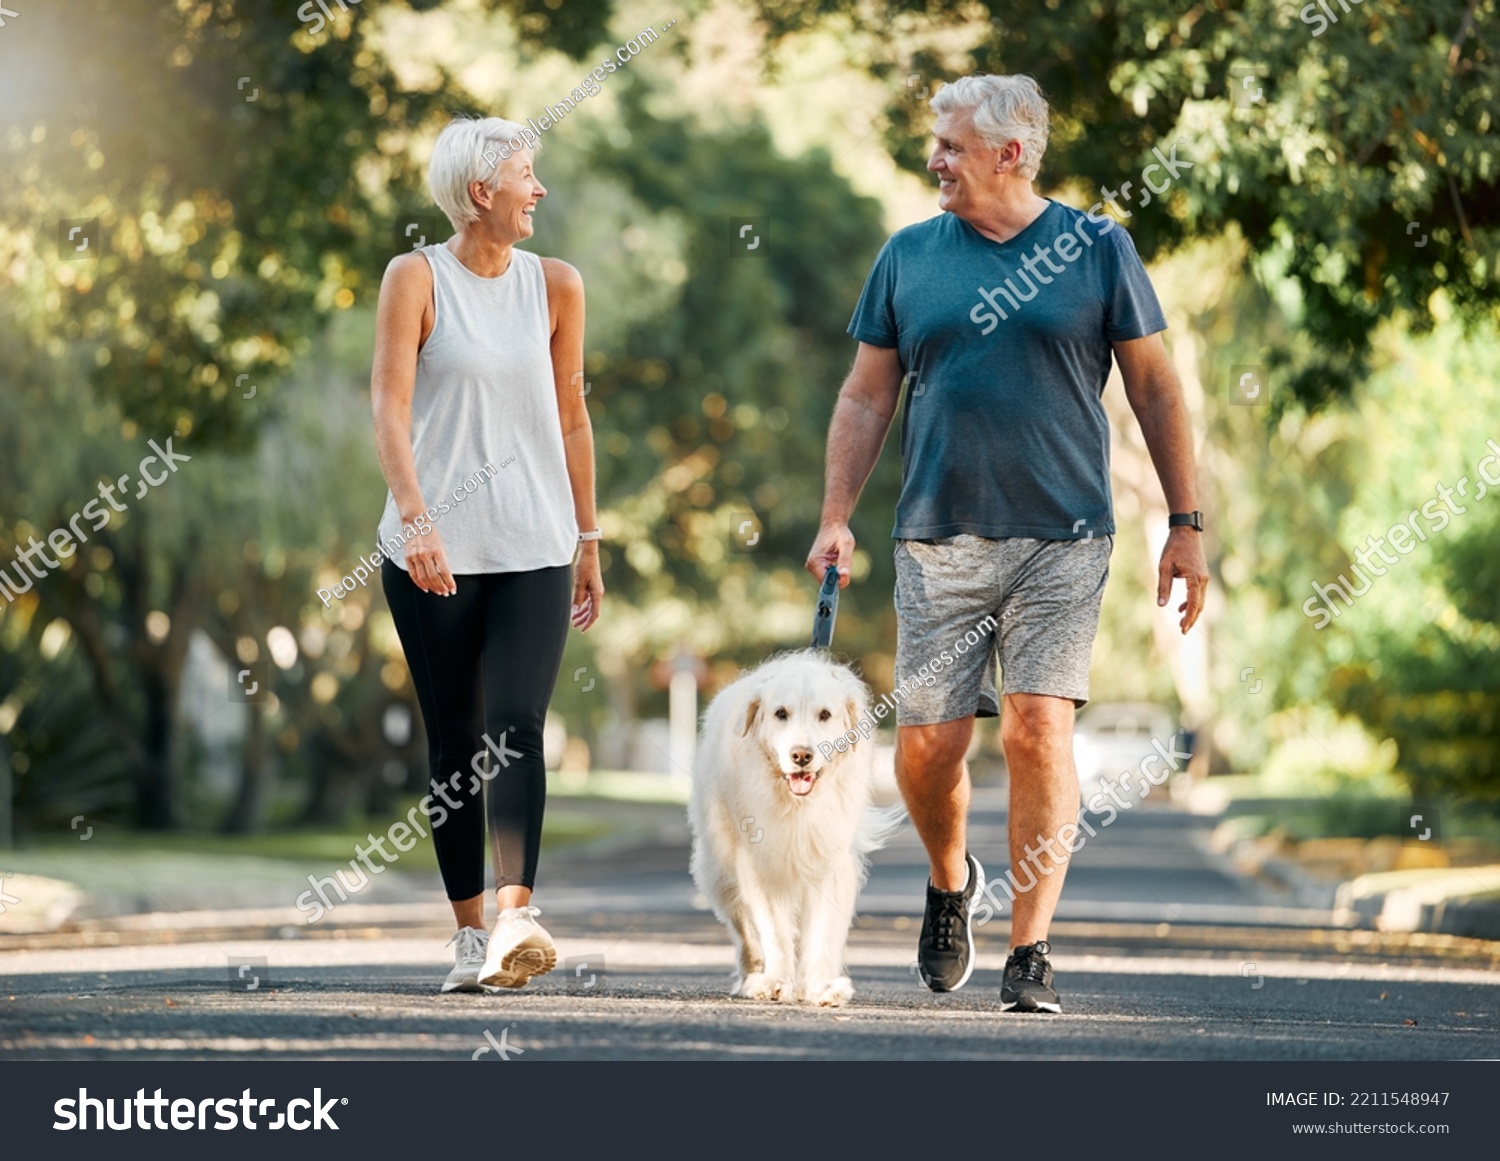 Retirement, fitness and walking with dog and couple in neighborhood park for relax, health and sports workout. Love, wellness and pet with old man and senior woman in outdoor morning walk together #2211548947